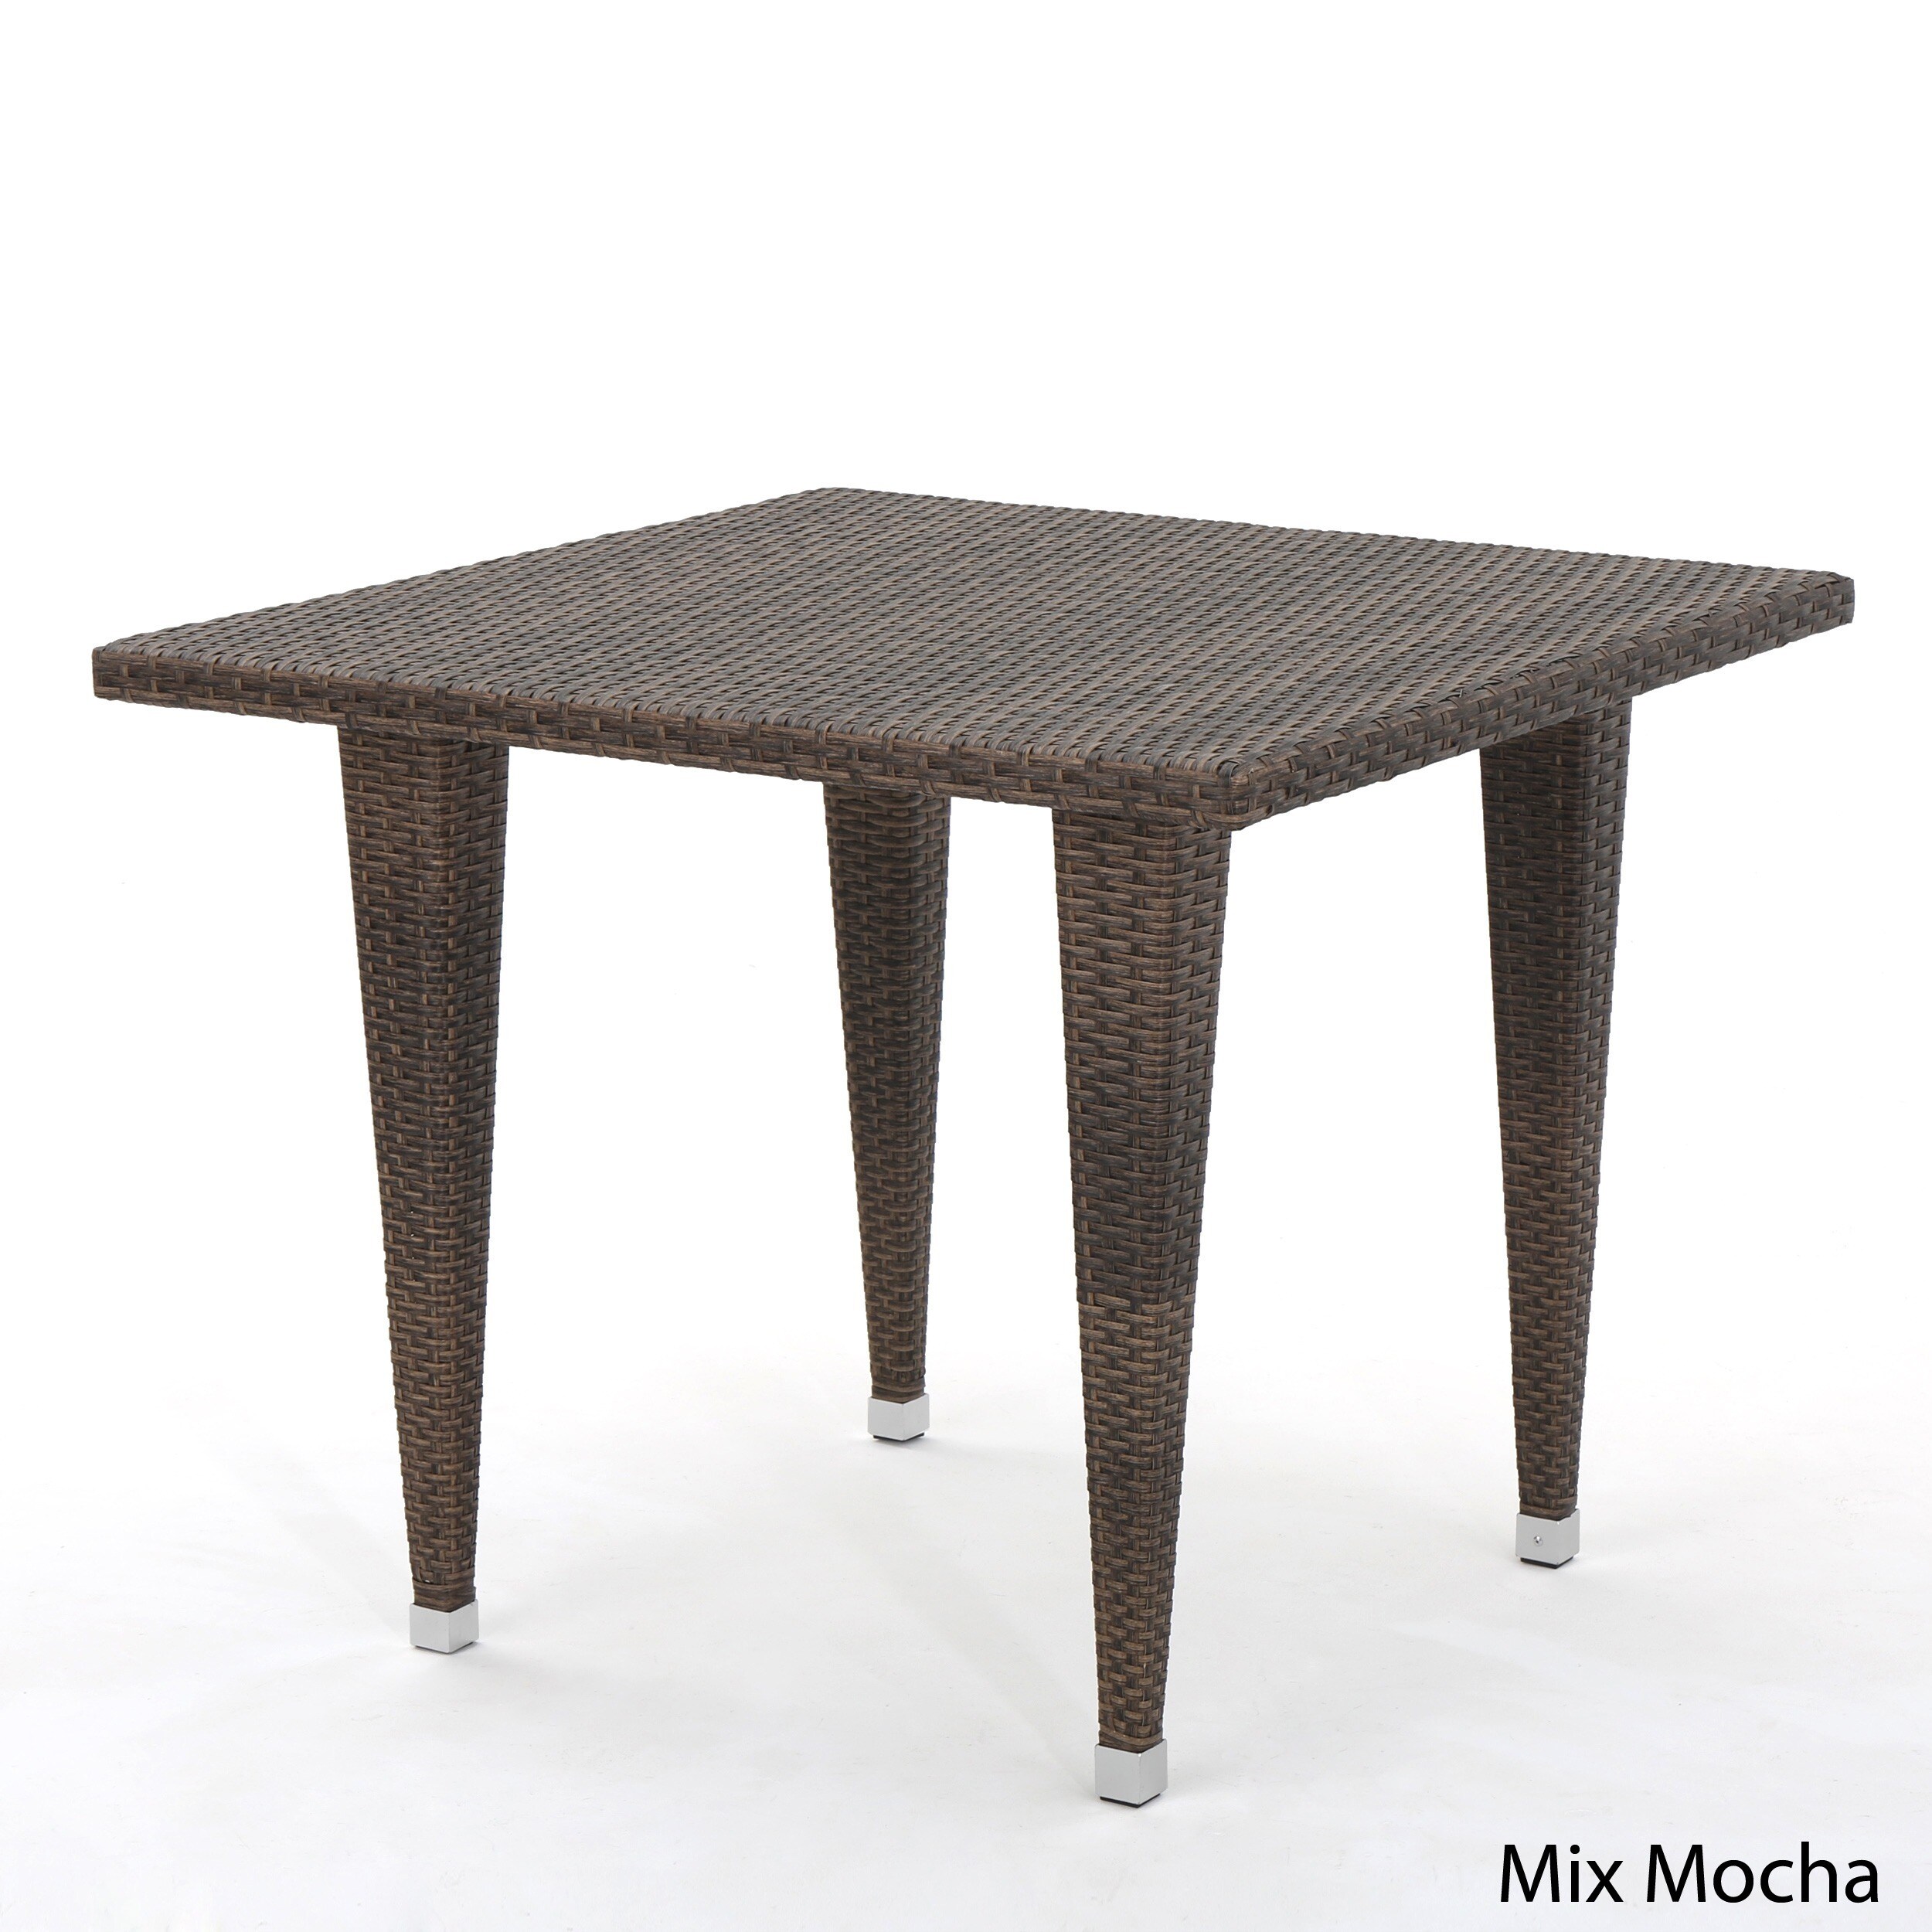 GDF Studio Barry Outdoor Wicker Square Dining Table, Multibrown - image 3 of 5